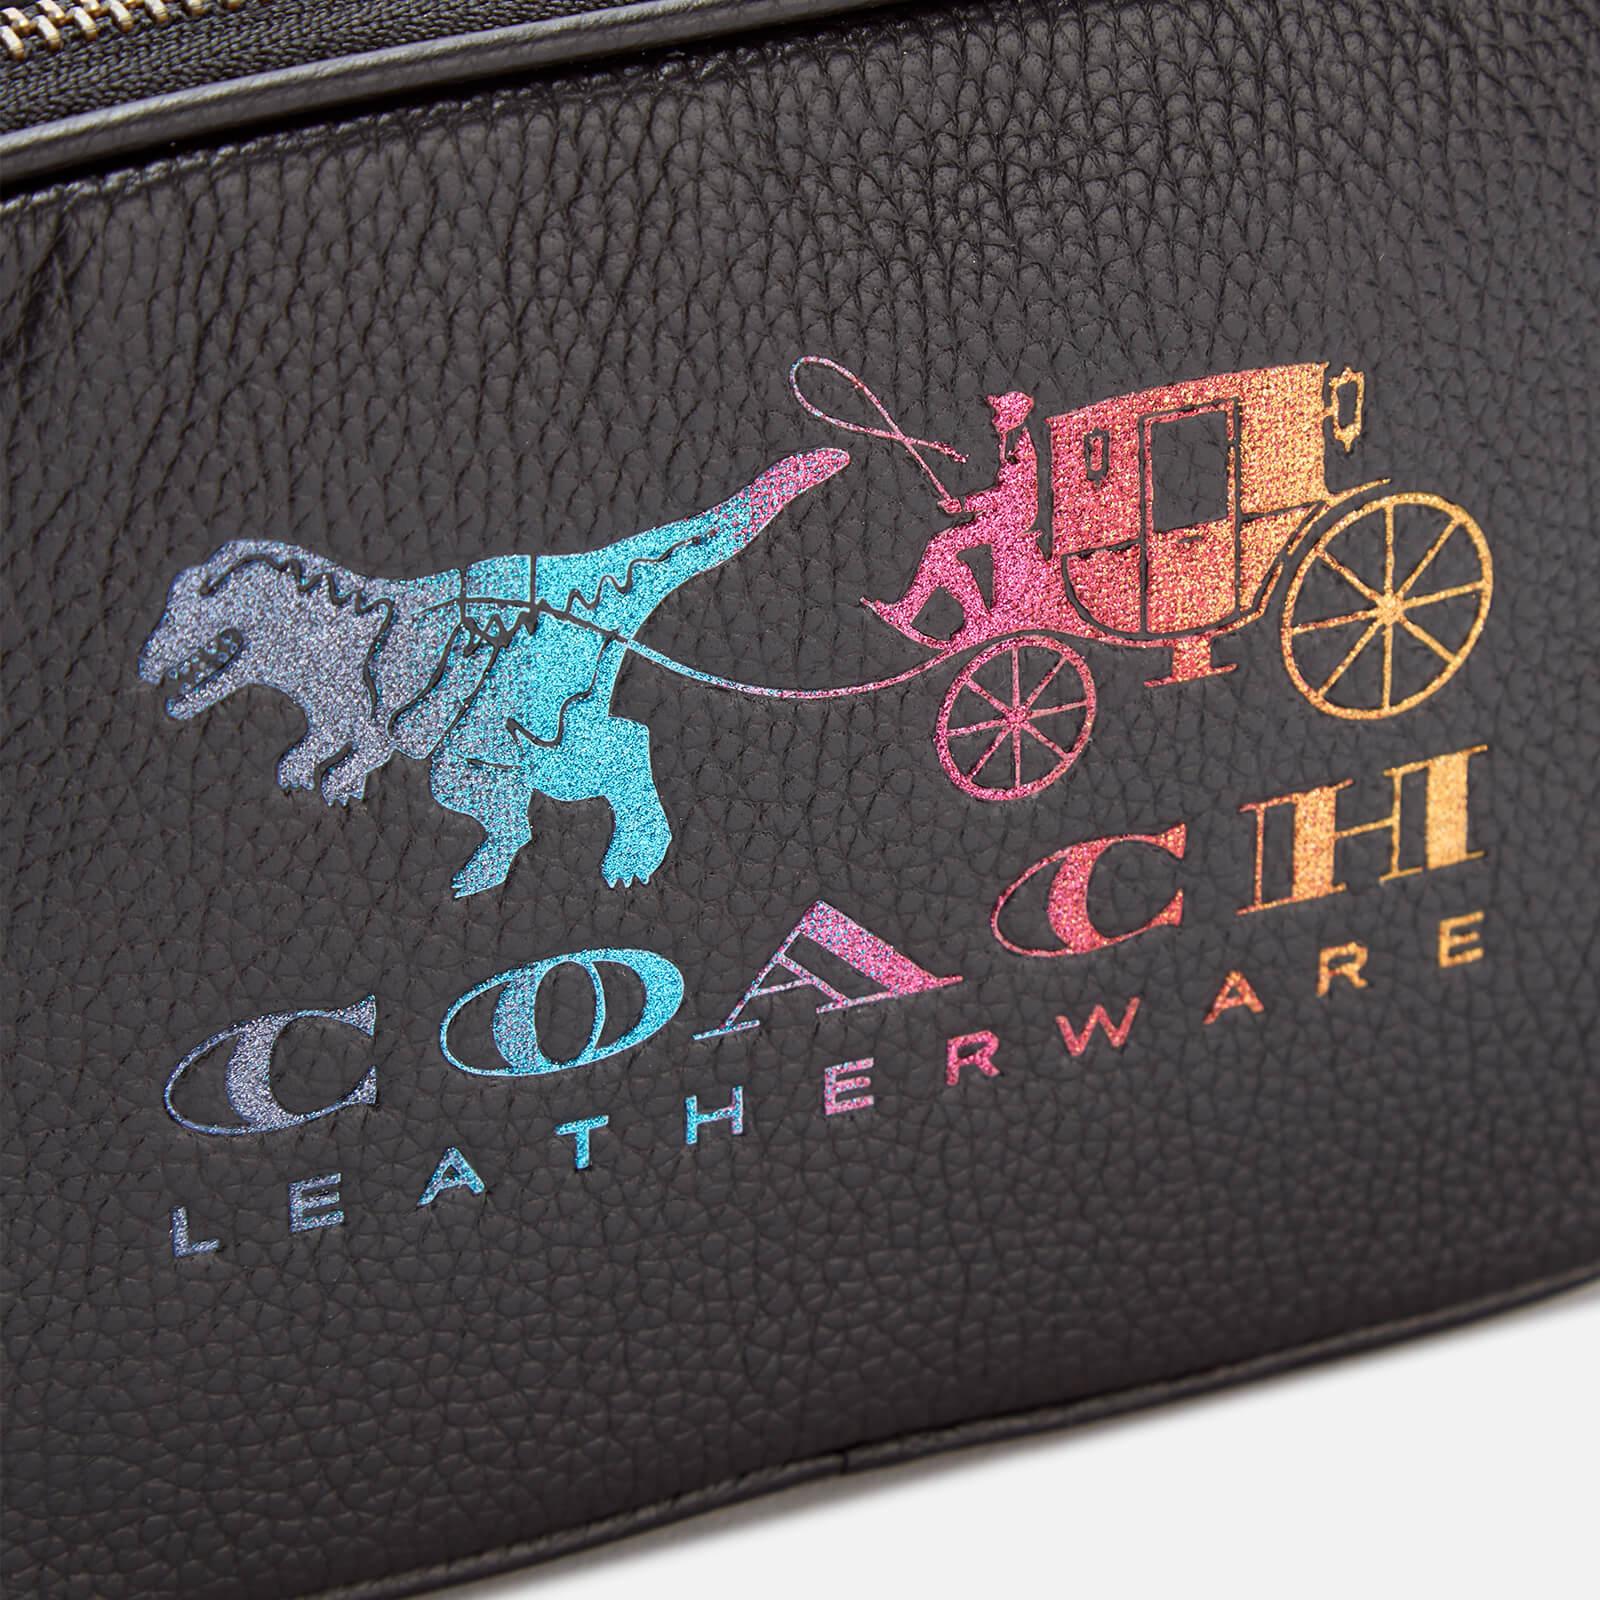 COACH Rexy And Carriage Sadie Bag in Black - Lyst